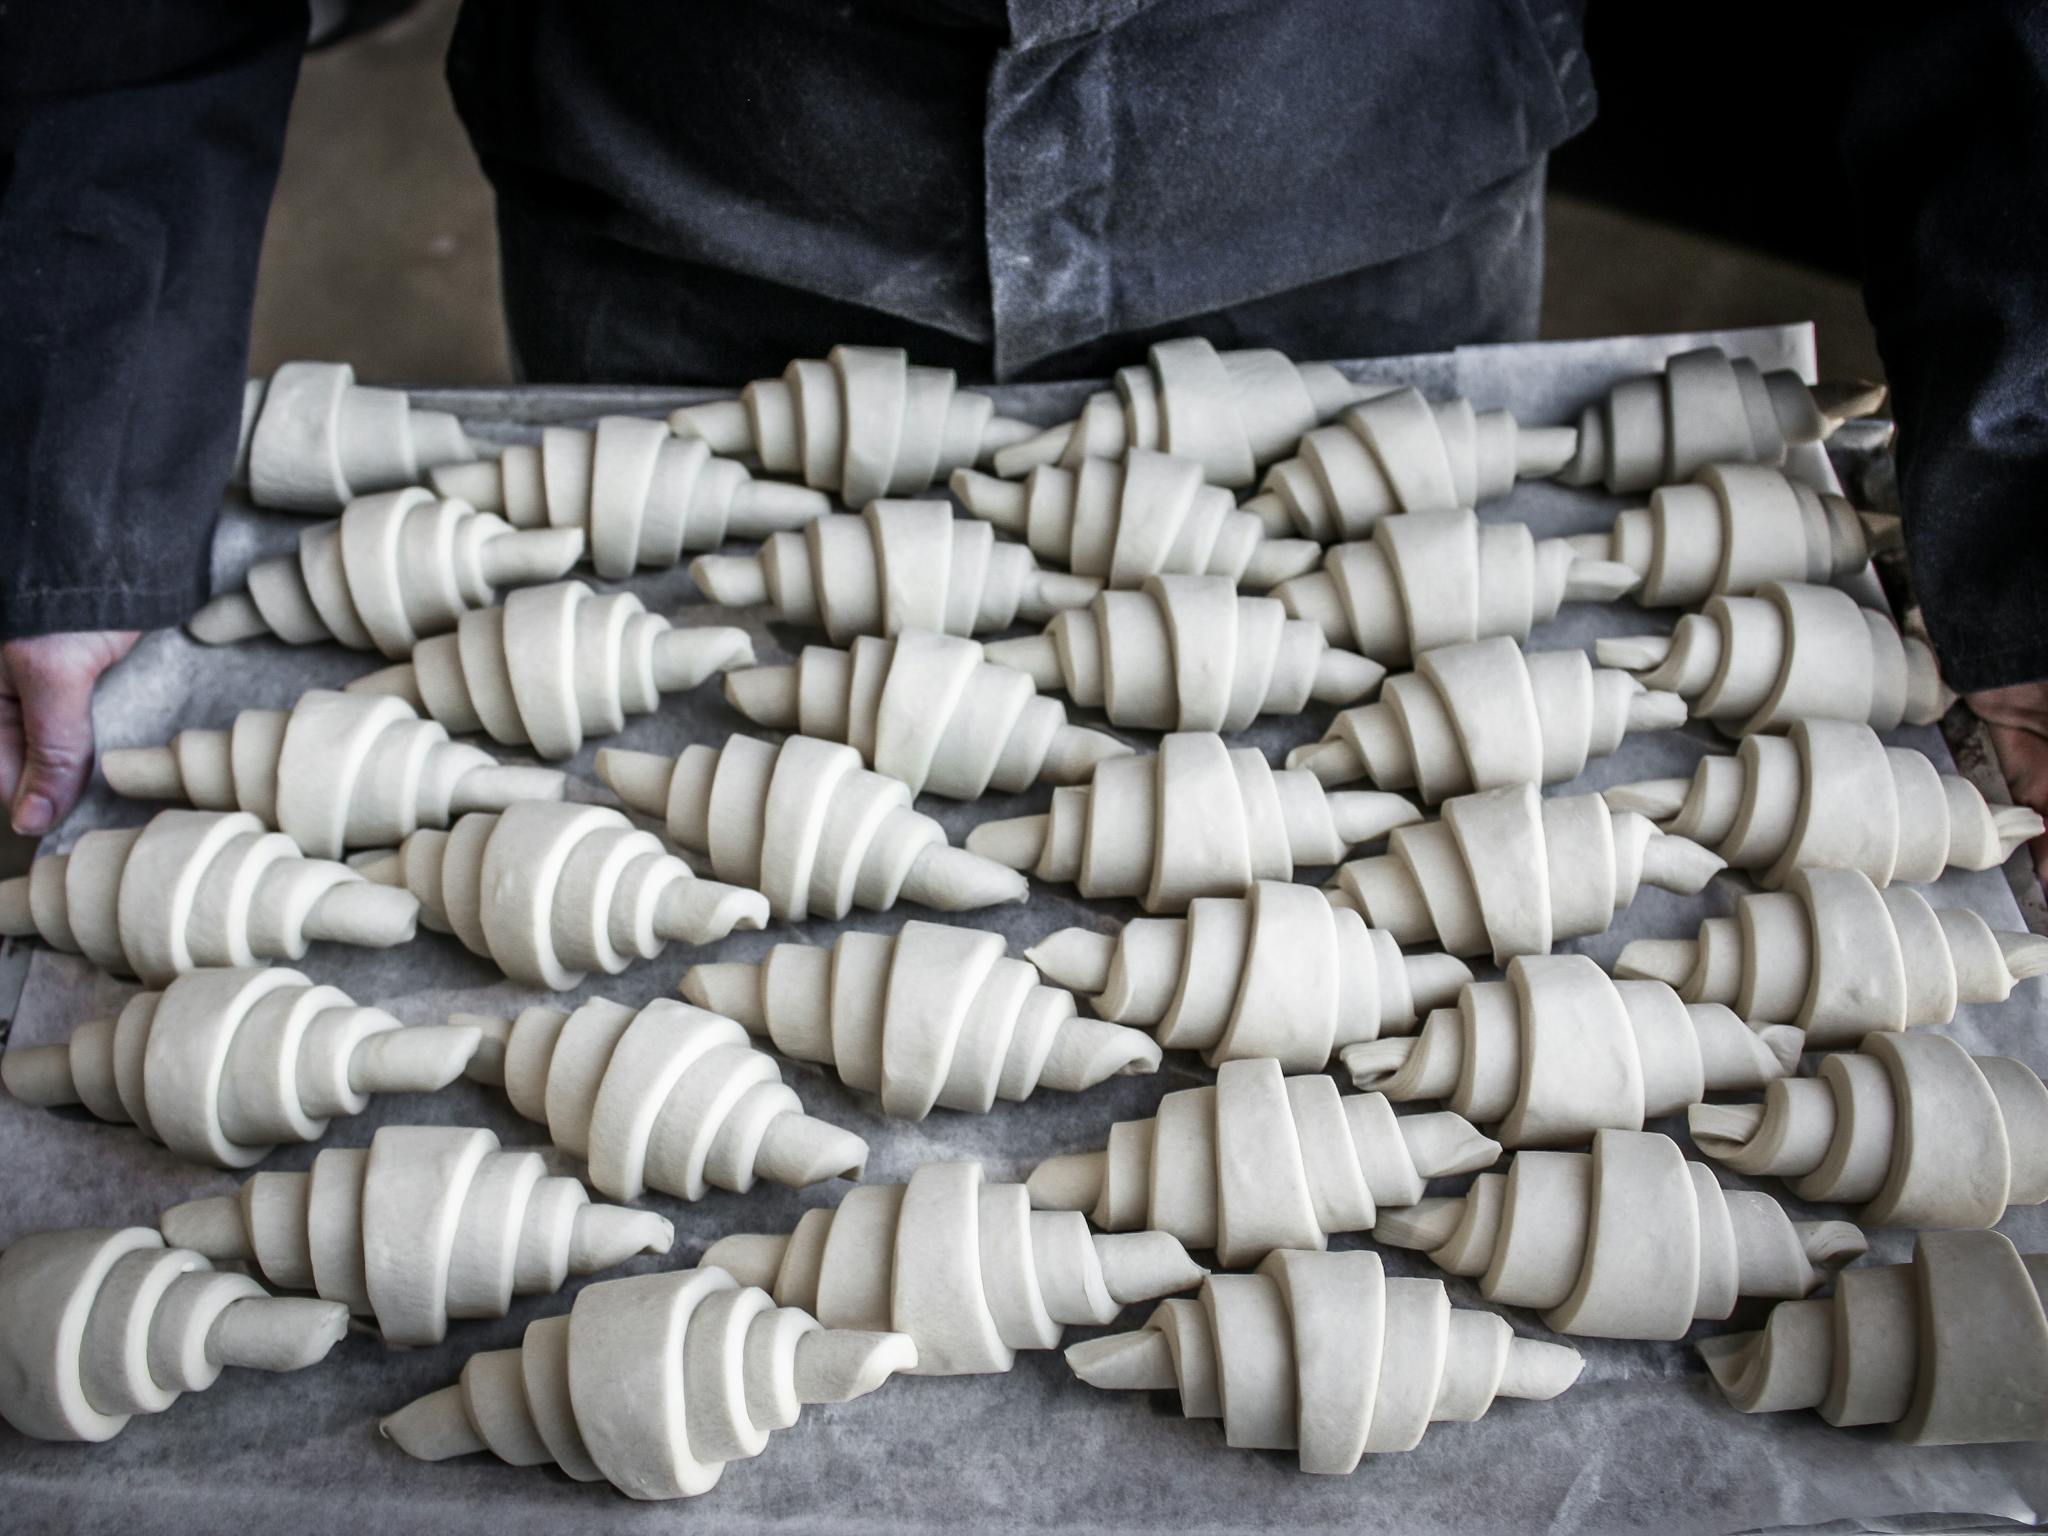 Rolled Croissants ready to proof and bake